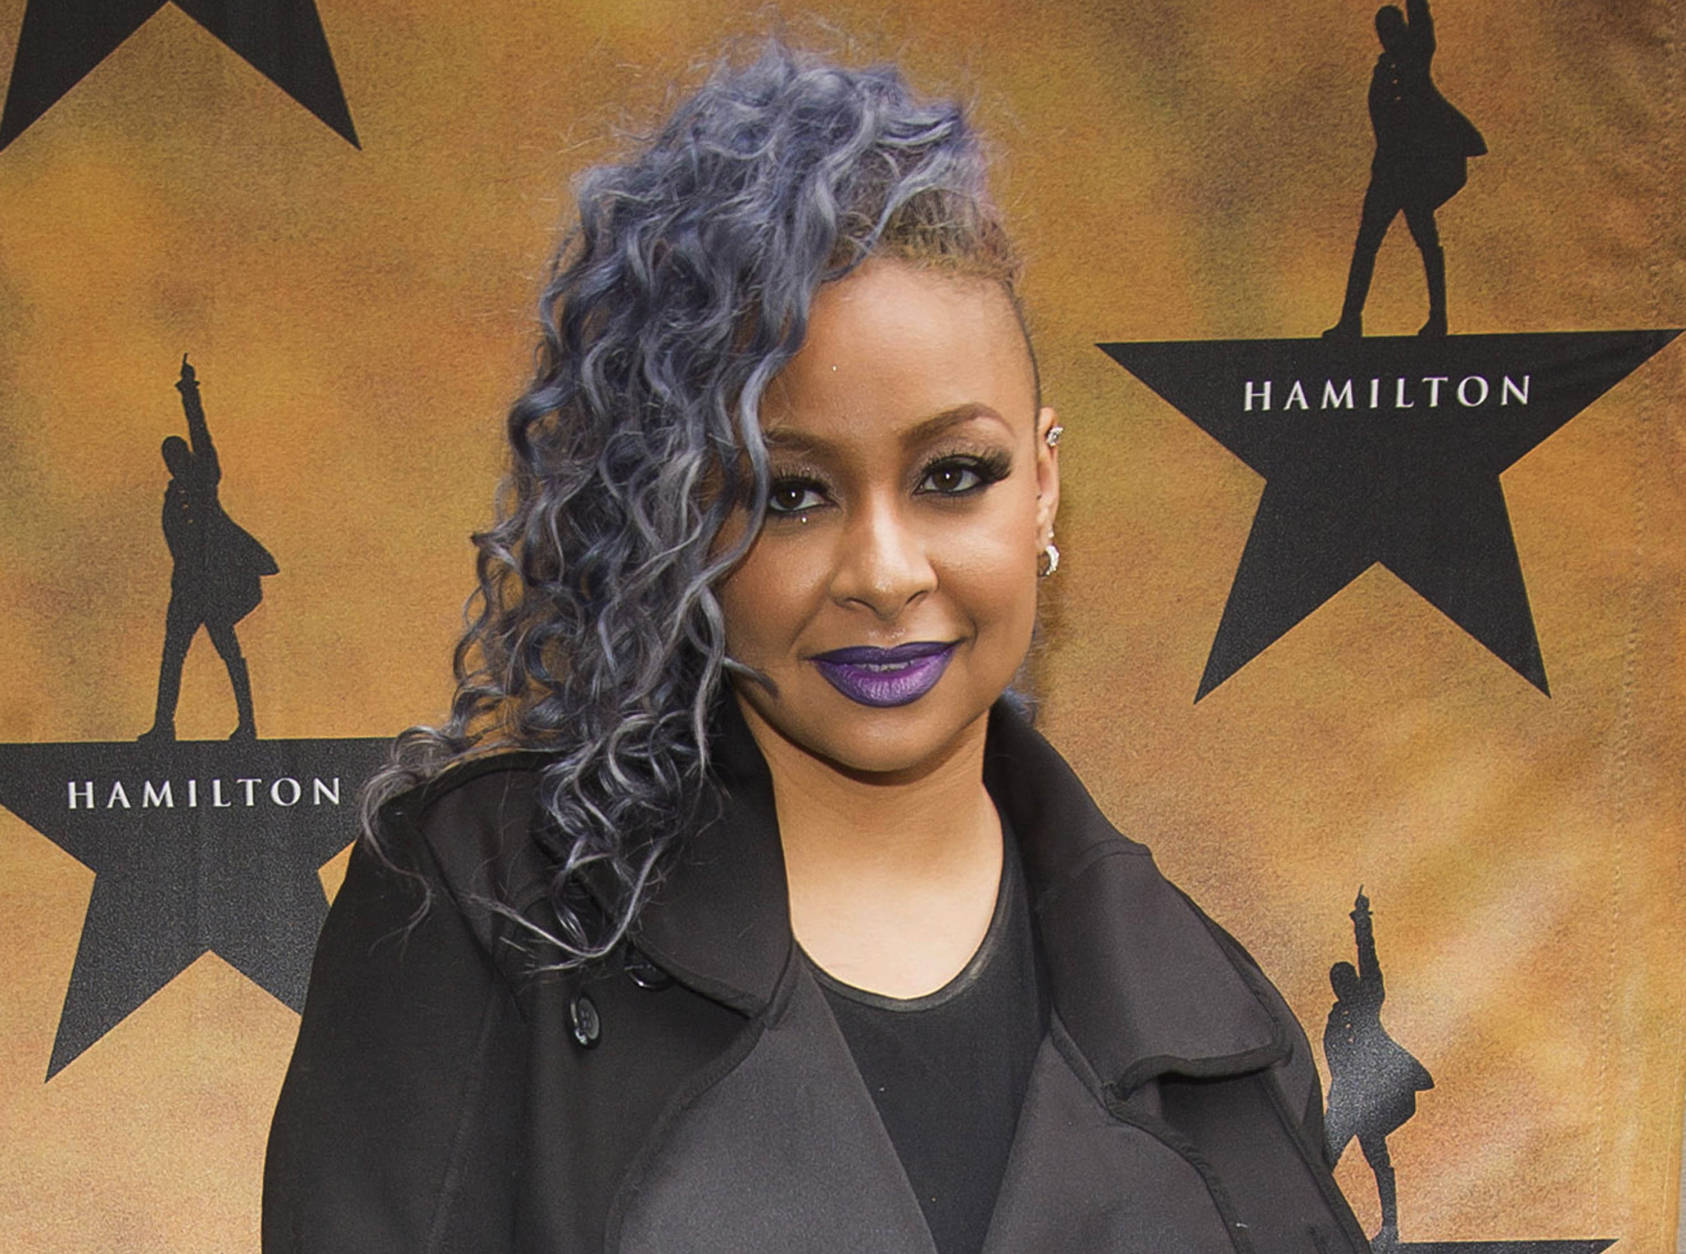 FILE - In this Aug. 6, 2015, file photo, Raven-Symone attends the Broadway opening night of "Hamilton" at the Richard Rodgers Theatre in New York. Actress Raven-Symone is the latest host to leave the daytime chatfest "The View." She announced on the show Thursday, Oct. 27, 2016, that she'll be gone before the end of the year. She's producing and starring in a remake of the sitcom "That's So Raven" for The Disney Channel, where she said her character will now be a single mom of two children, one of whom has "visions." (Photo by Charles Sykes/Invision/AP, File)